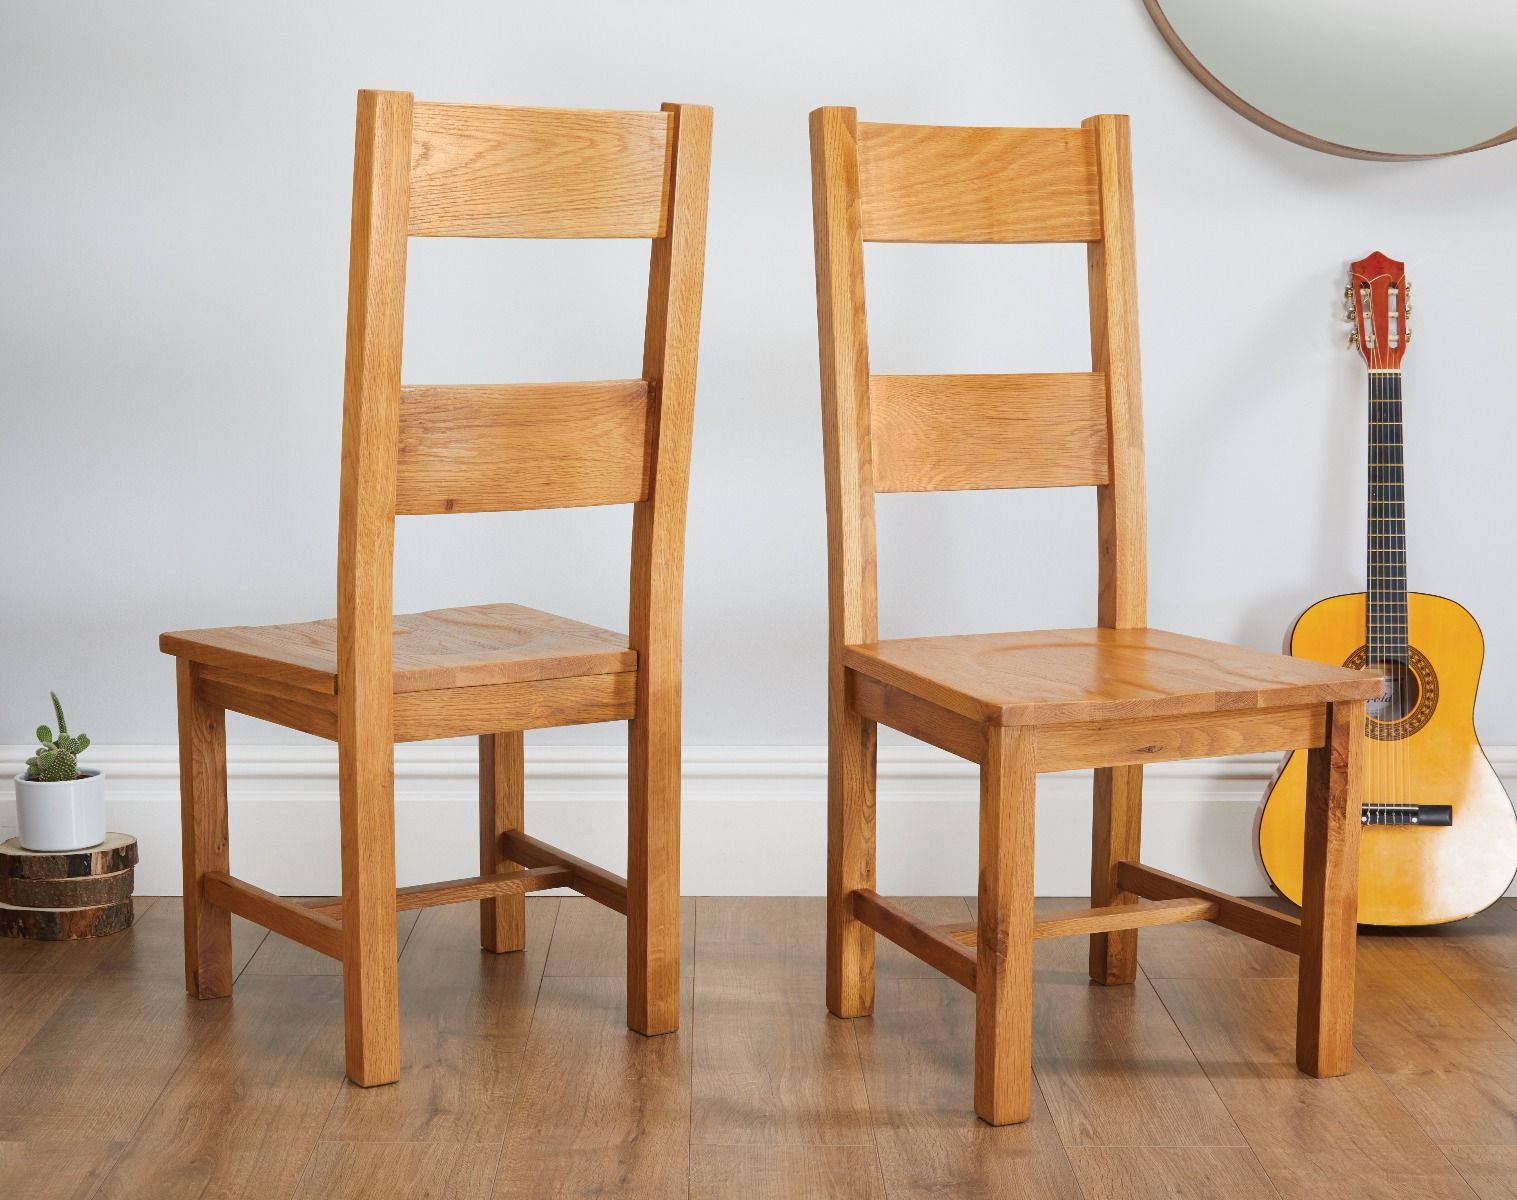 Chester Country Oak Ladder Back Timber Seat Oak Dining Chair - 10% OFF CODE SAVE